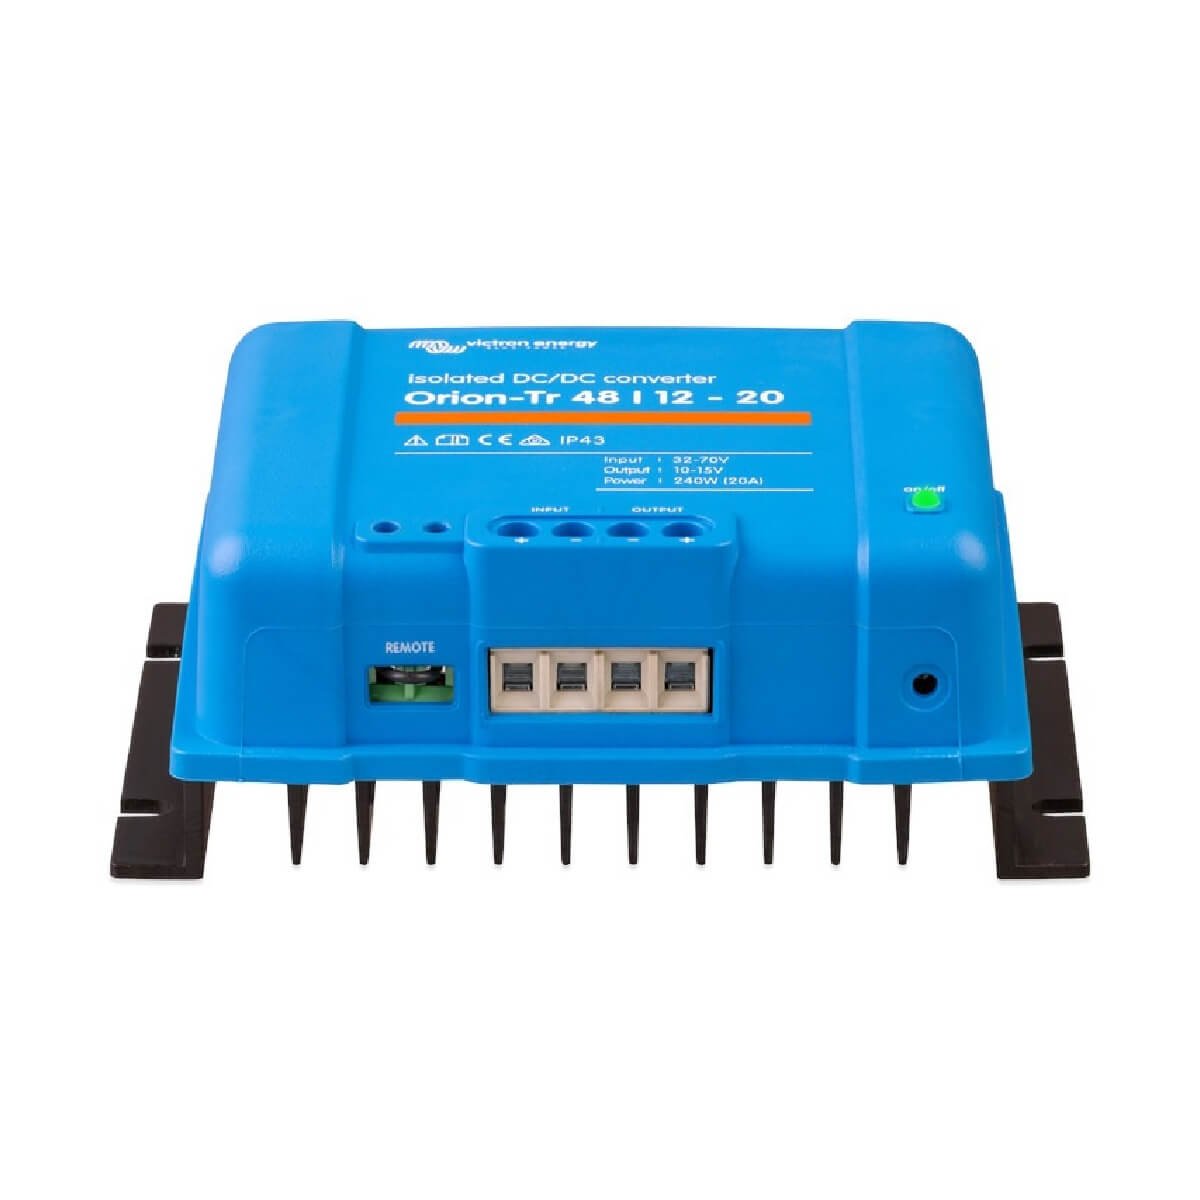 The Victron Orion-Tr 48/12-20 DC-DC Converter - 48V to 12V 20A Isolated Converter, known as the Blue Orion-Tr, features multiple ports and cooling fins, designed to efficiently handle 48V to 12V/20A conversion.